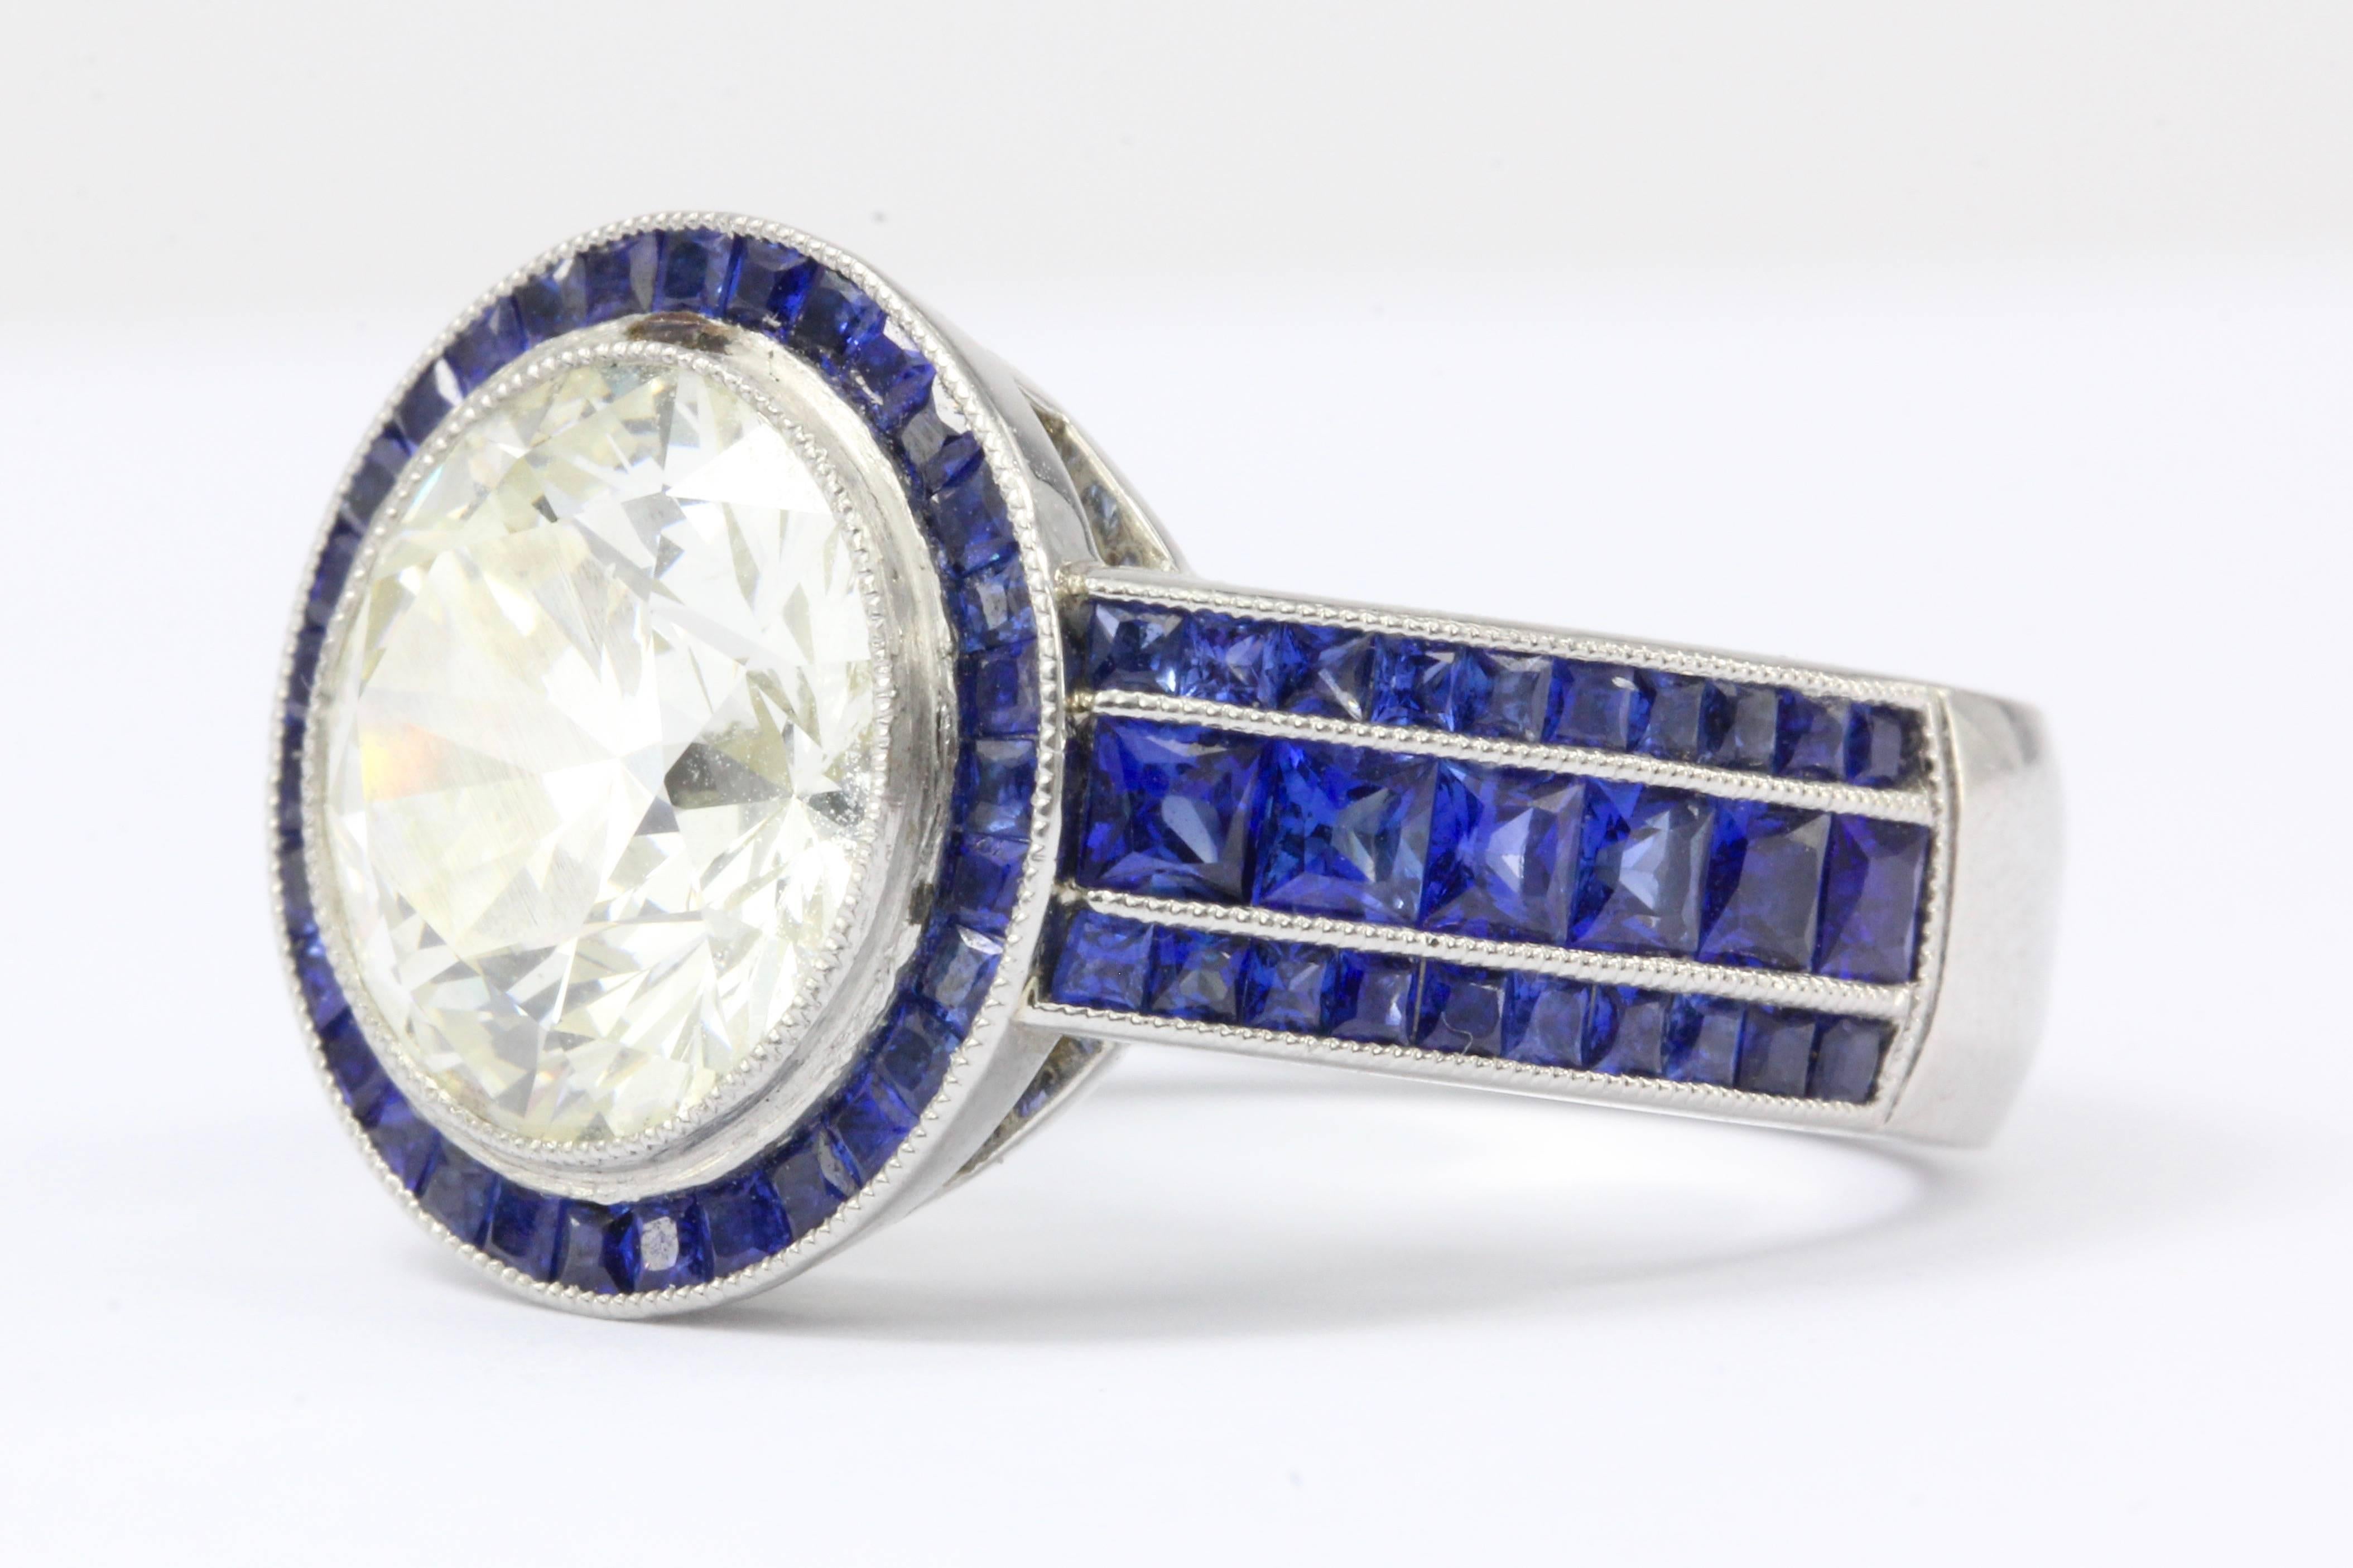 4.03 Carat Diamond w/ 2 carats of Sapphires Platinum Engagement Ring

Like a bright brilliant full moon filling the darkness of a sapphire blue night this diamond couldn't be more perfectly set. The mounting is platinum, the center round brilliant